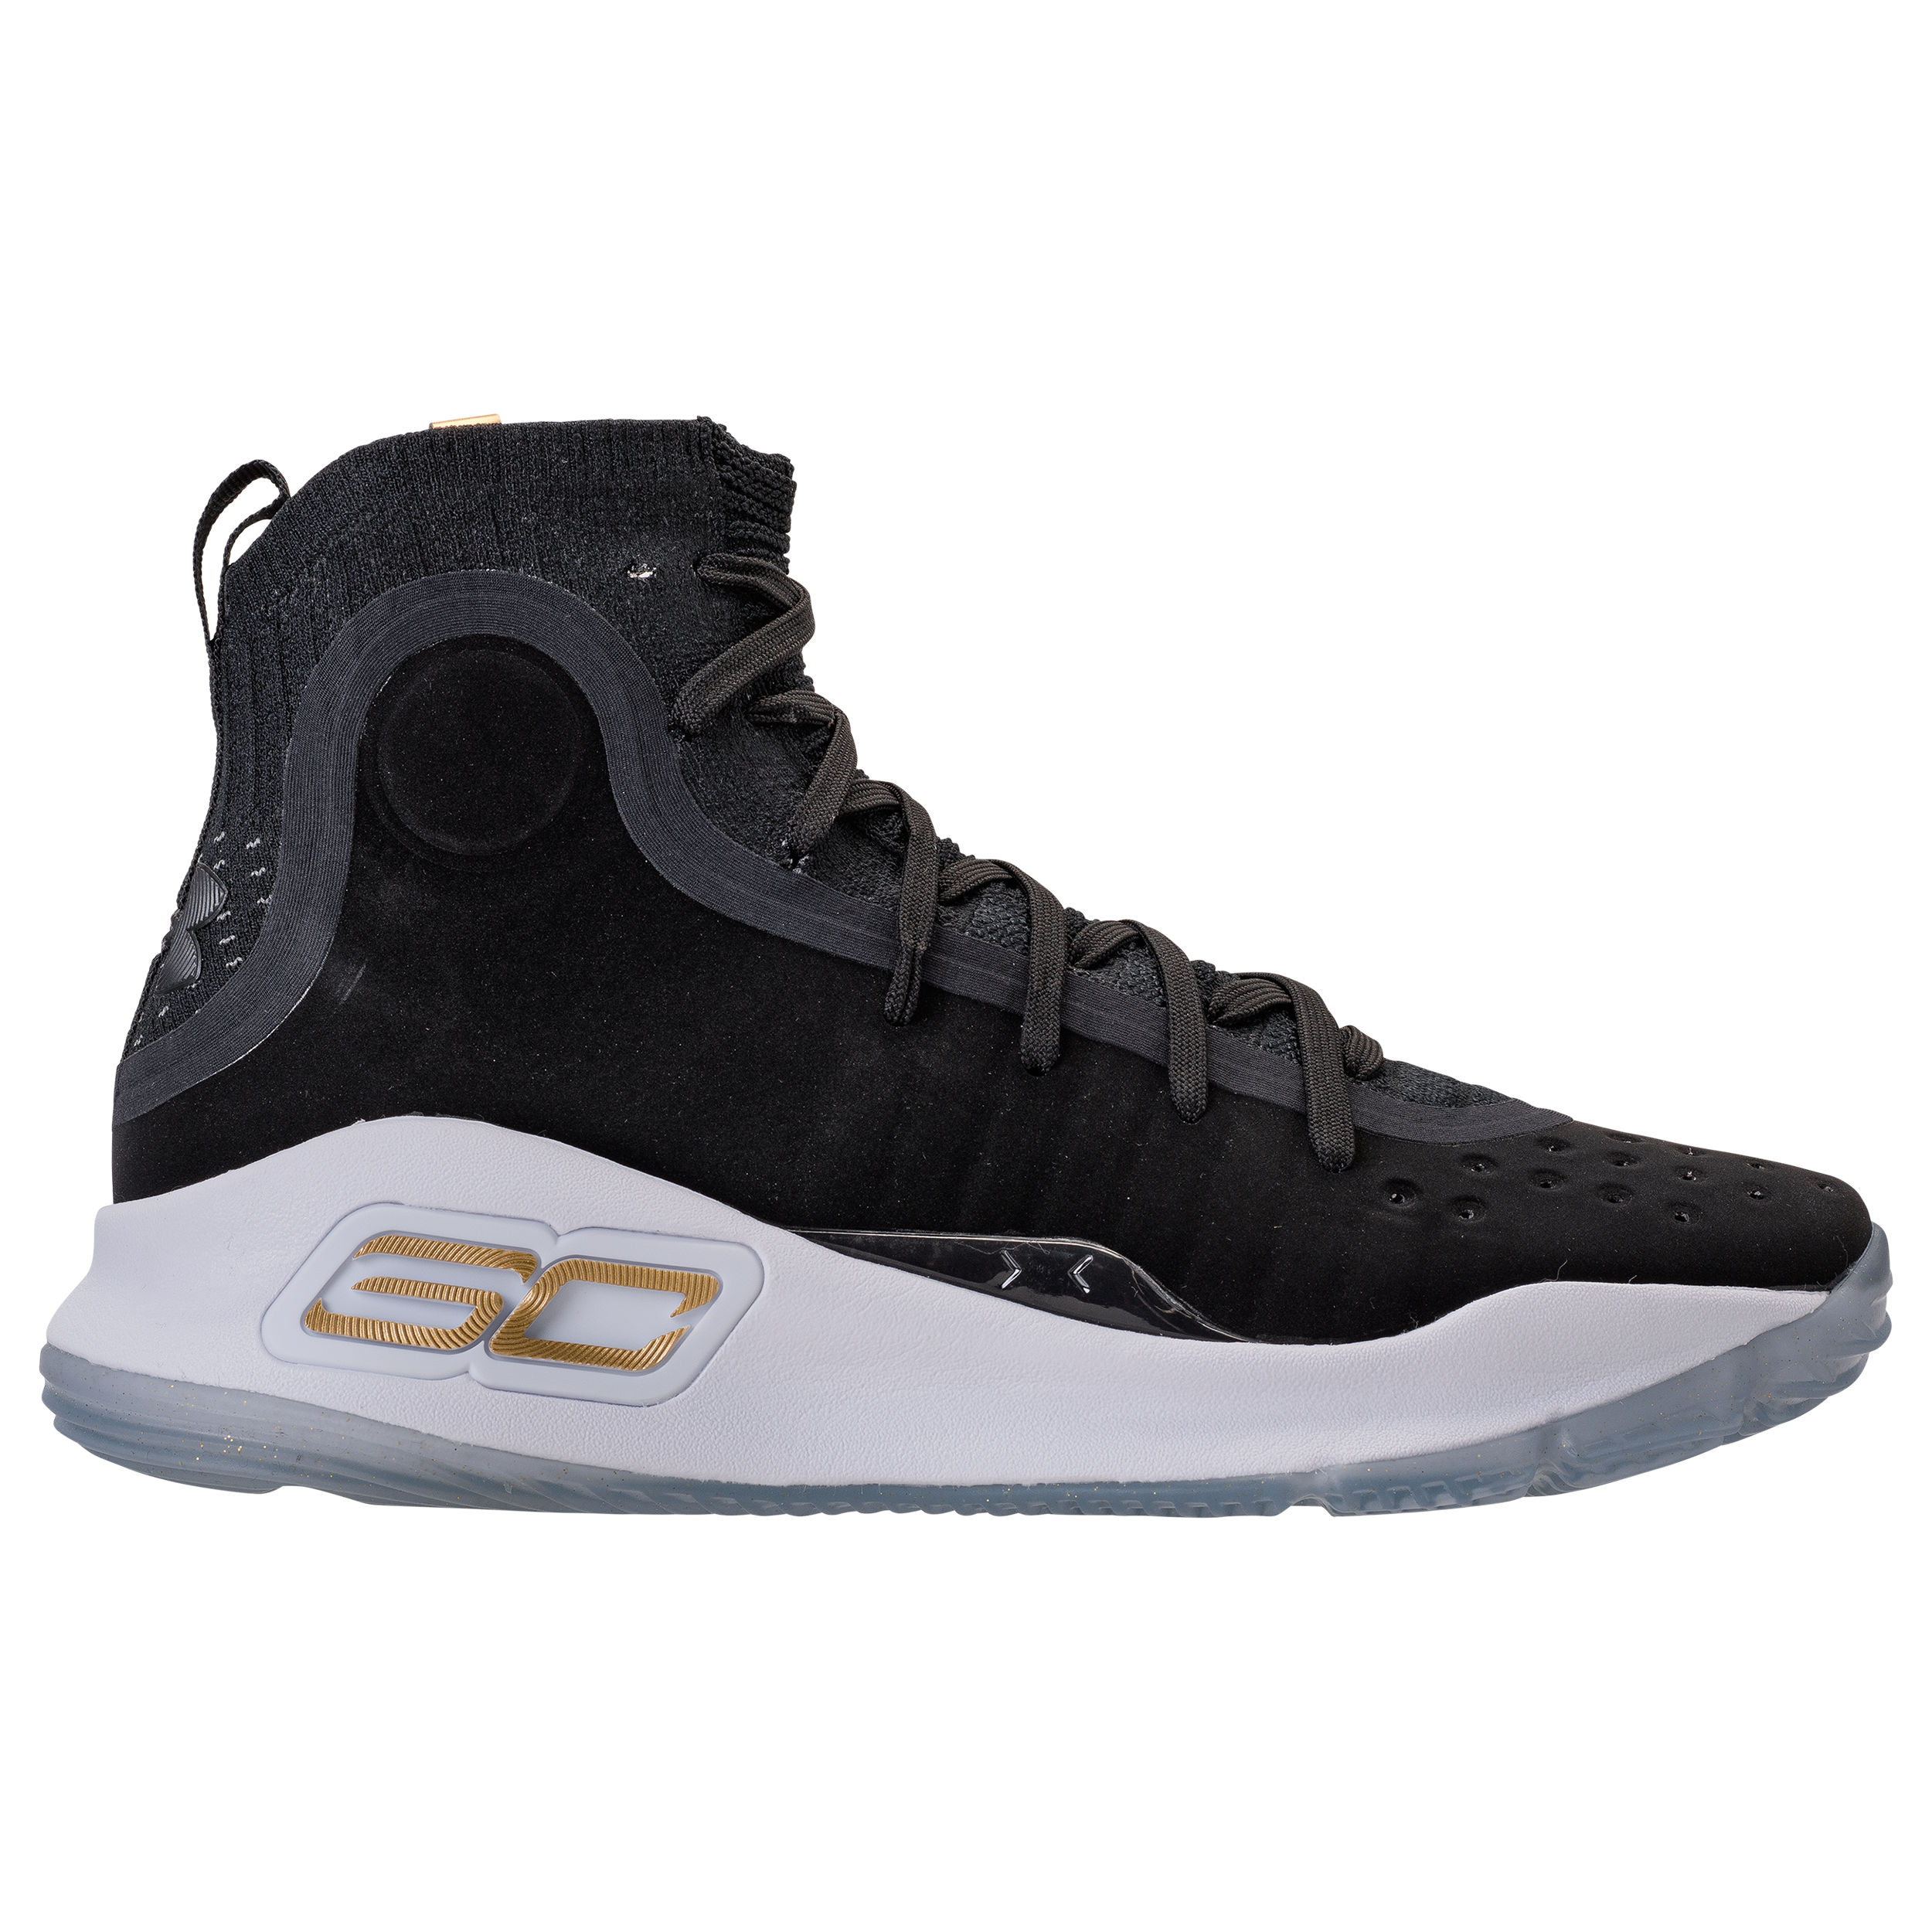 Under armour curry 4 black gold 2